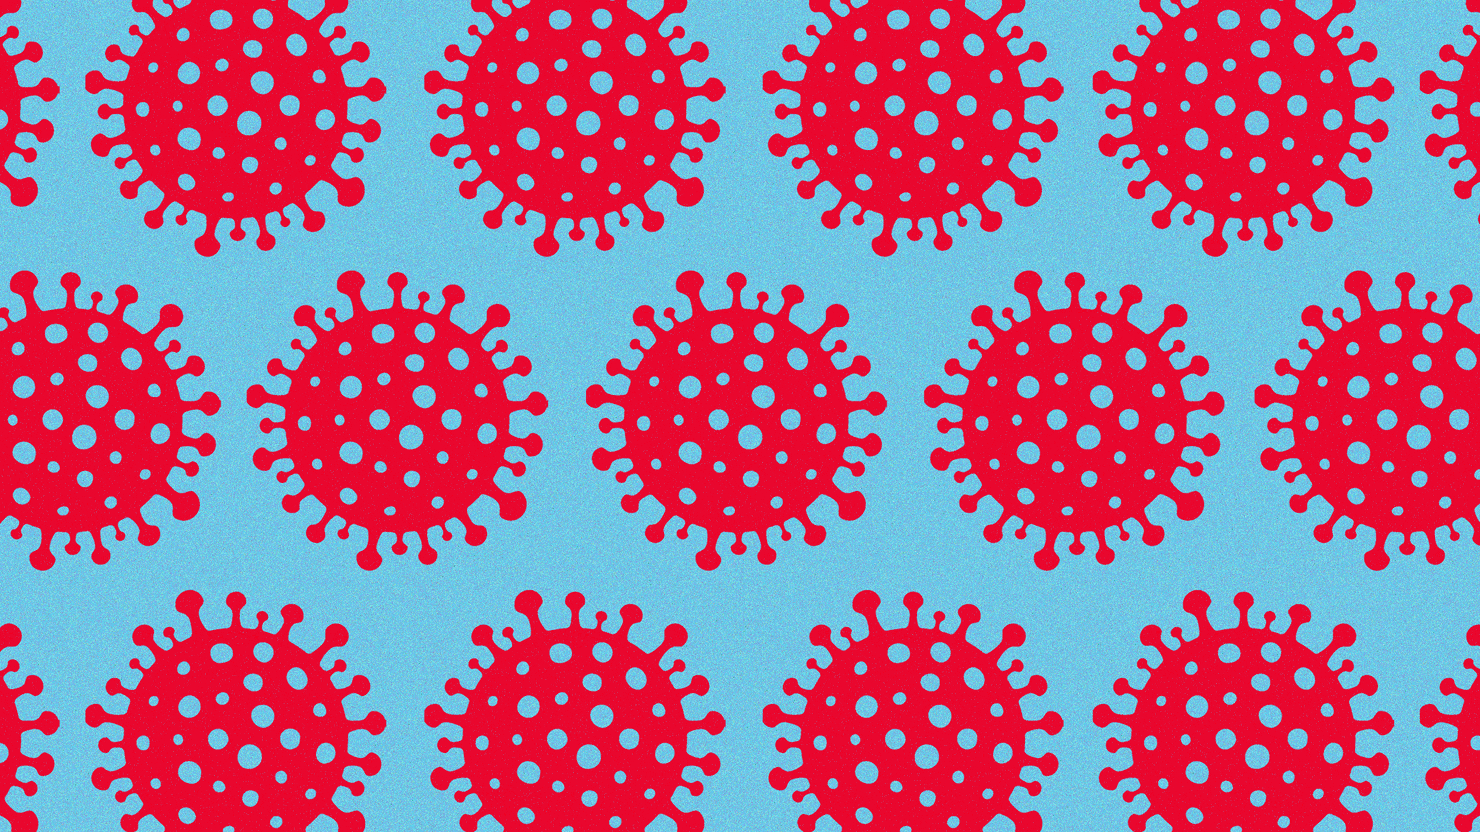 Scientists Make Breakthrough in Developing a New Vaccine That Could Finally Beat COVID – The Daily Beast